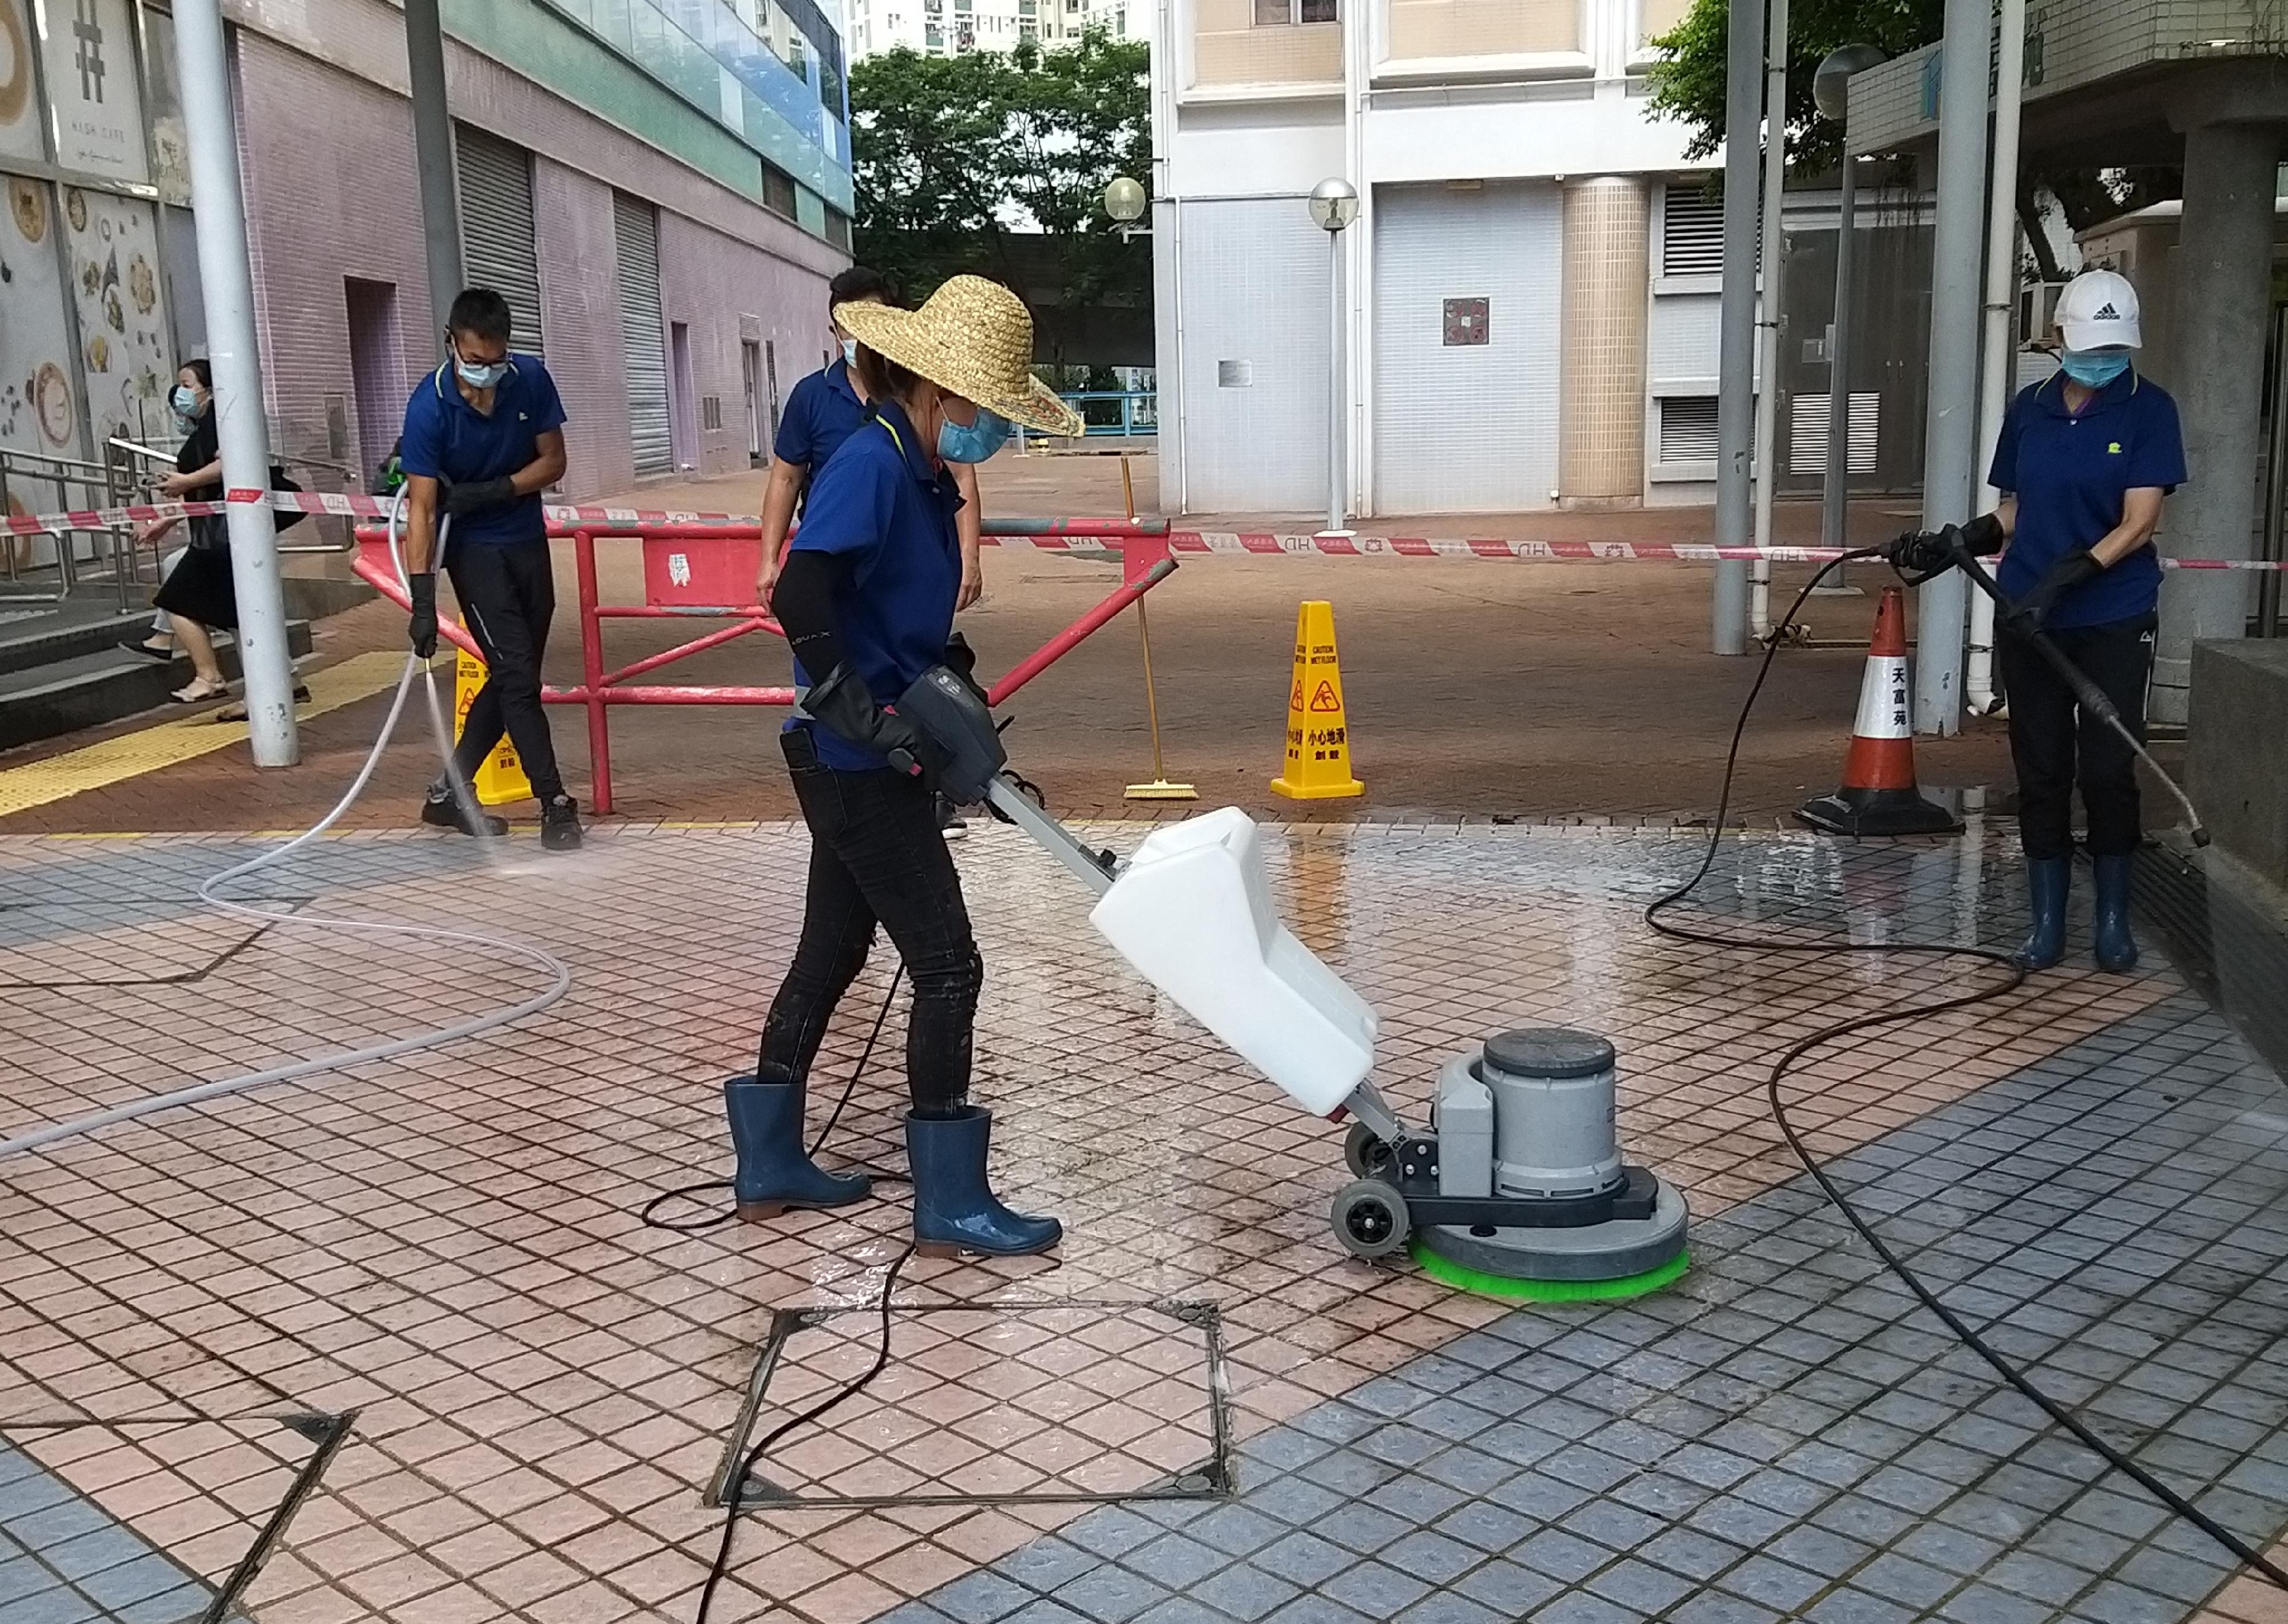 The Housing Department fully supports the work direction set by the District Matters Co-ordination Task Force and has conducted the enhanced Estate Cleaning Operation in all public housing estates in the territory since August. Regular cleaning work in housing estates has been stepped up, including doubling the efforts in cleaning public areas with high pedestrian flow and frequently used facilities.